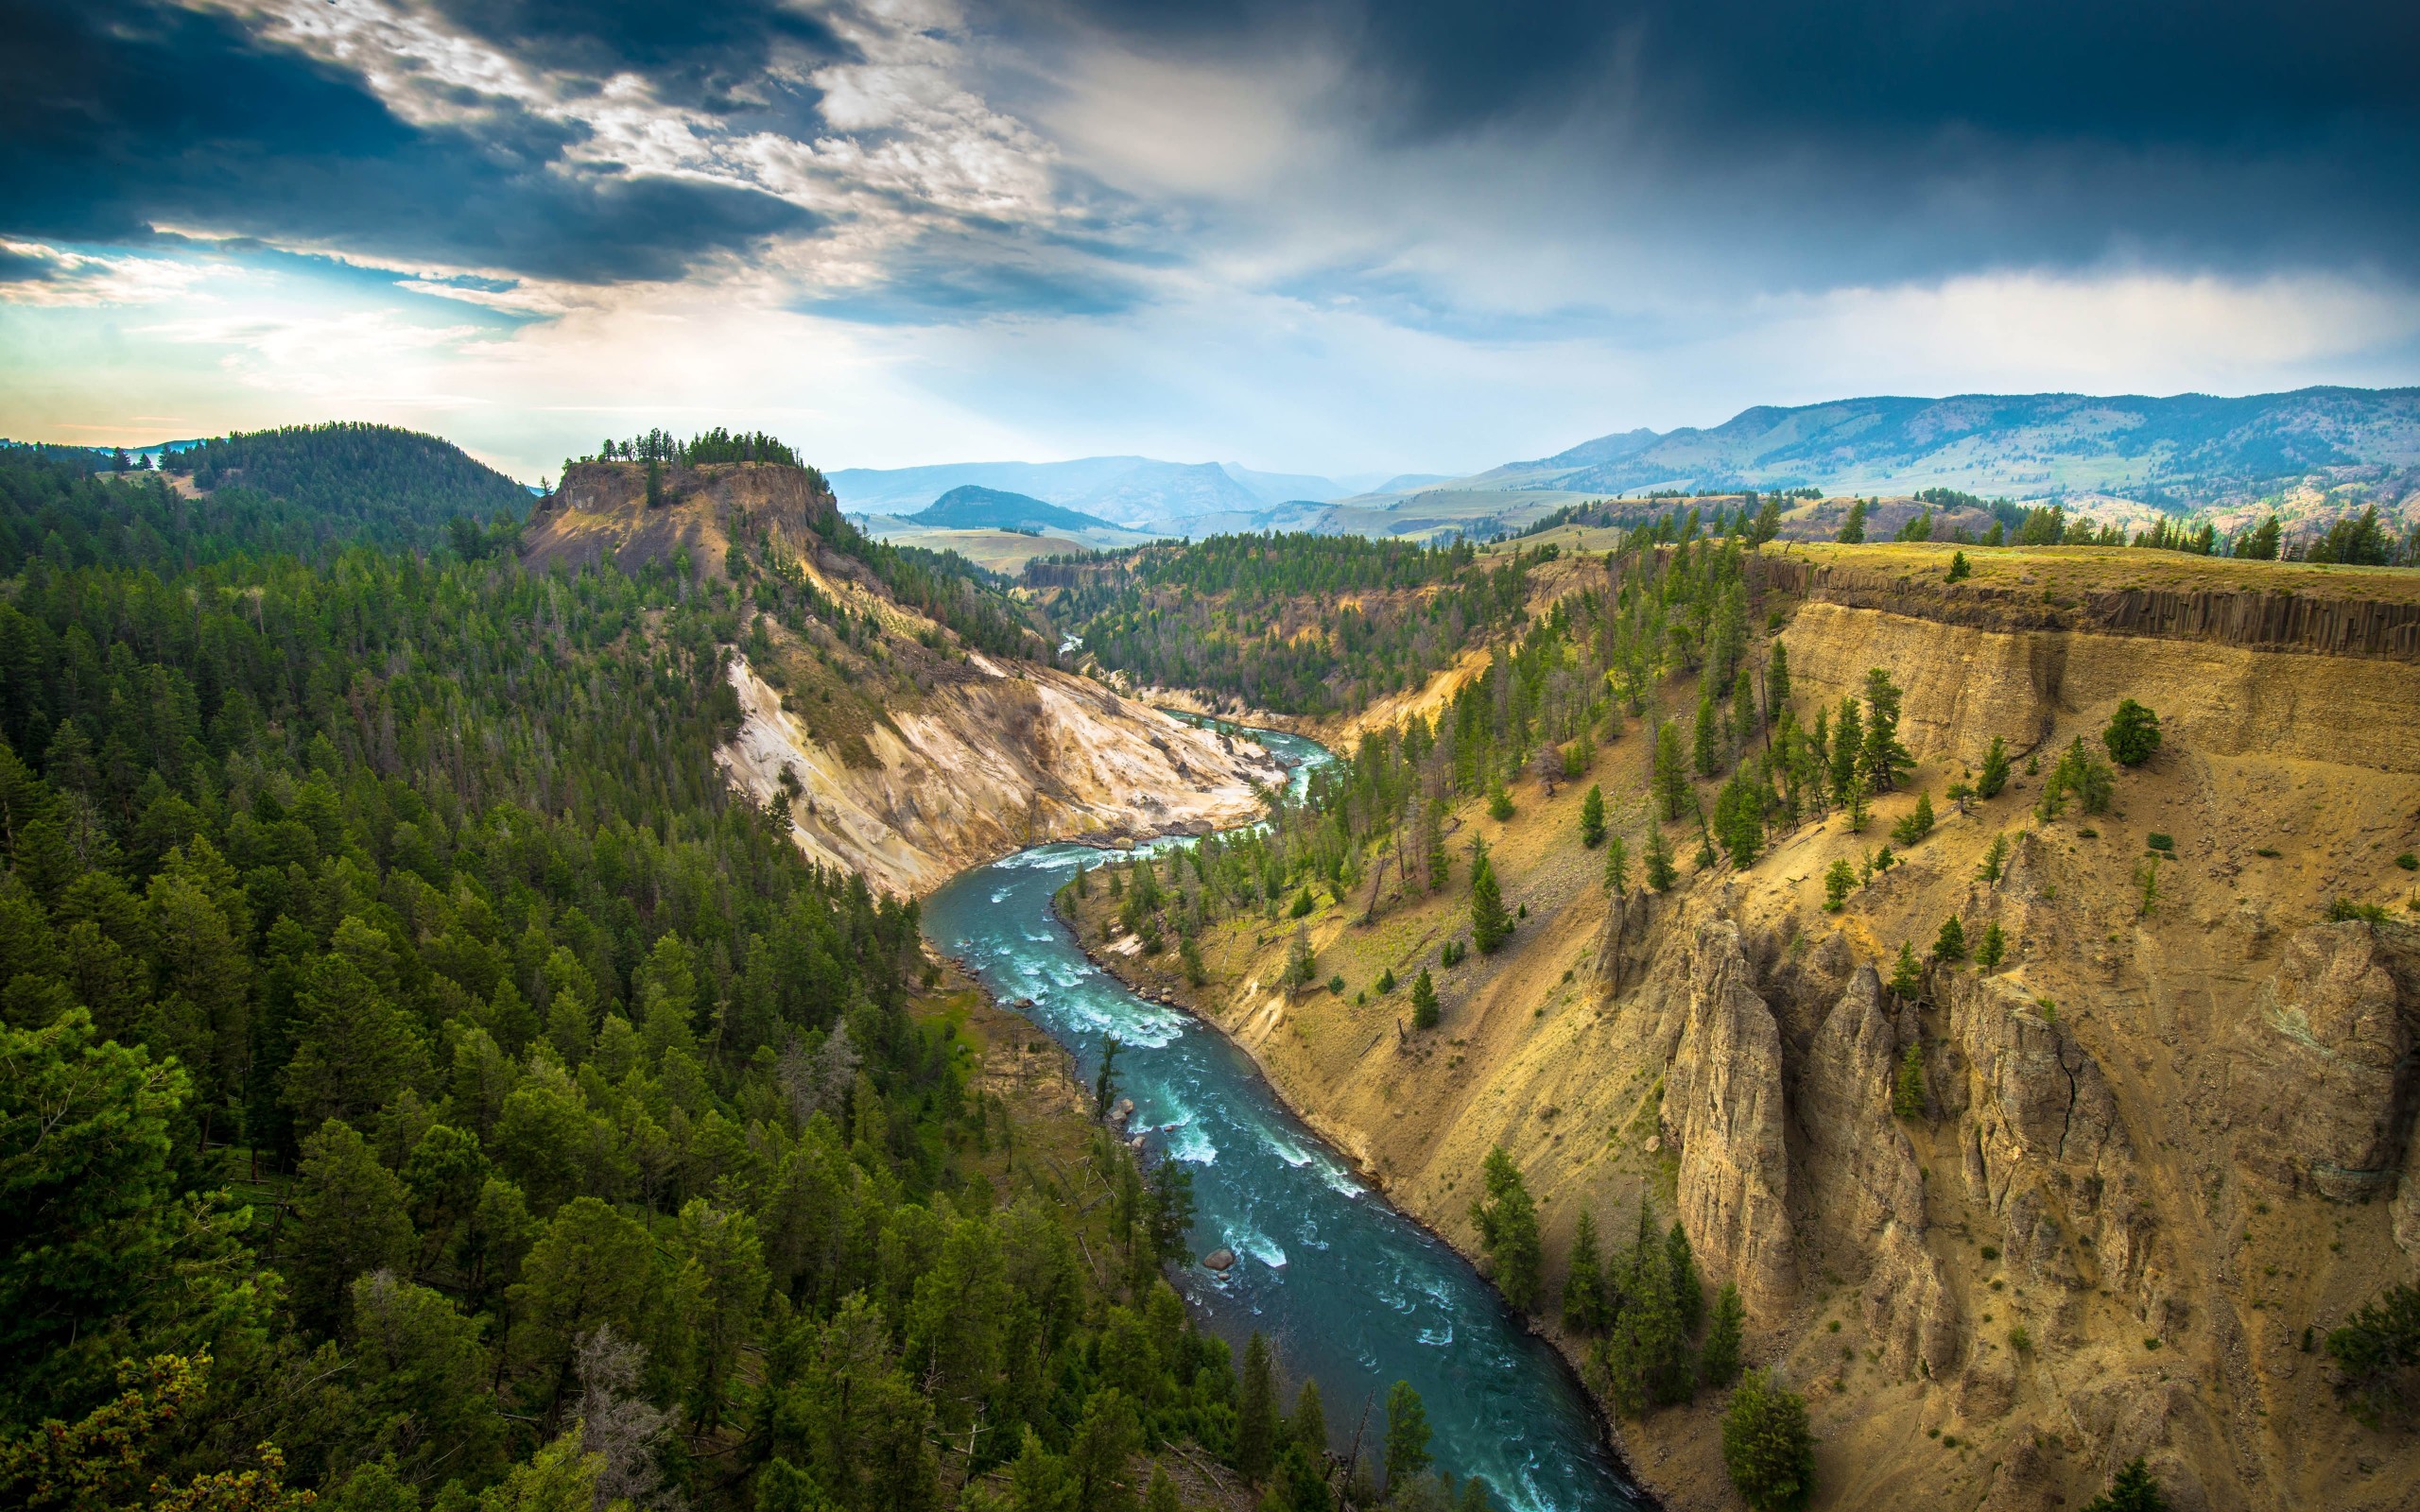 The River, Grand Canyon of Yellowstone National Park, USA Wallpaper for Desktop 2560x1600